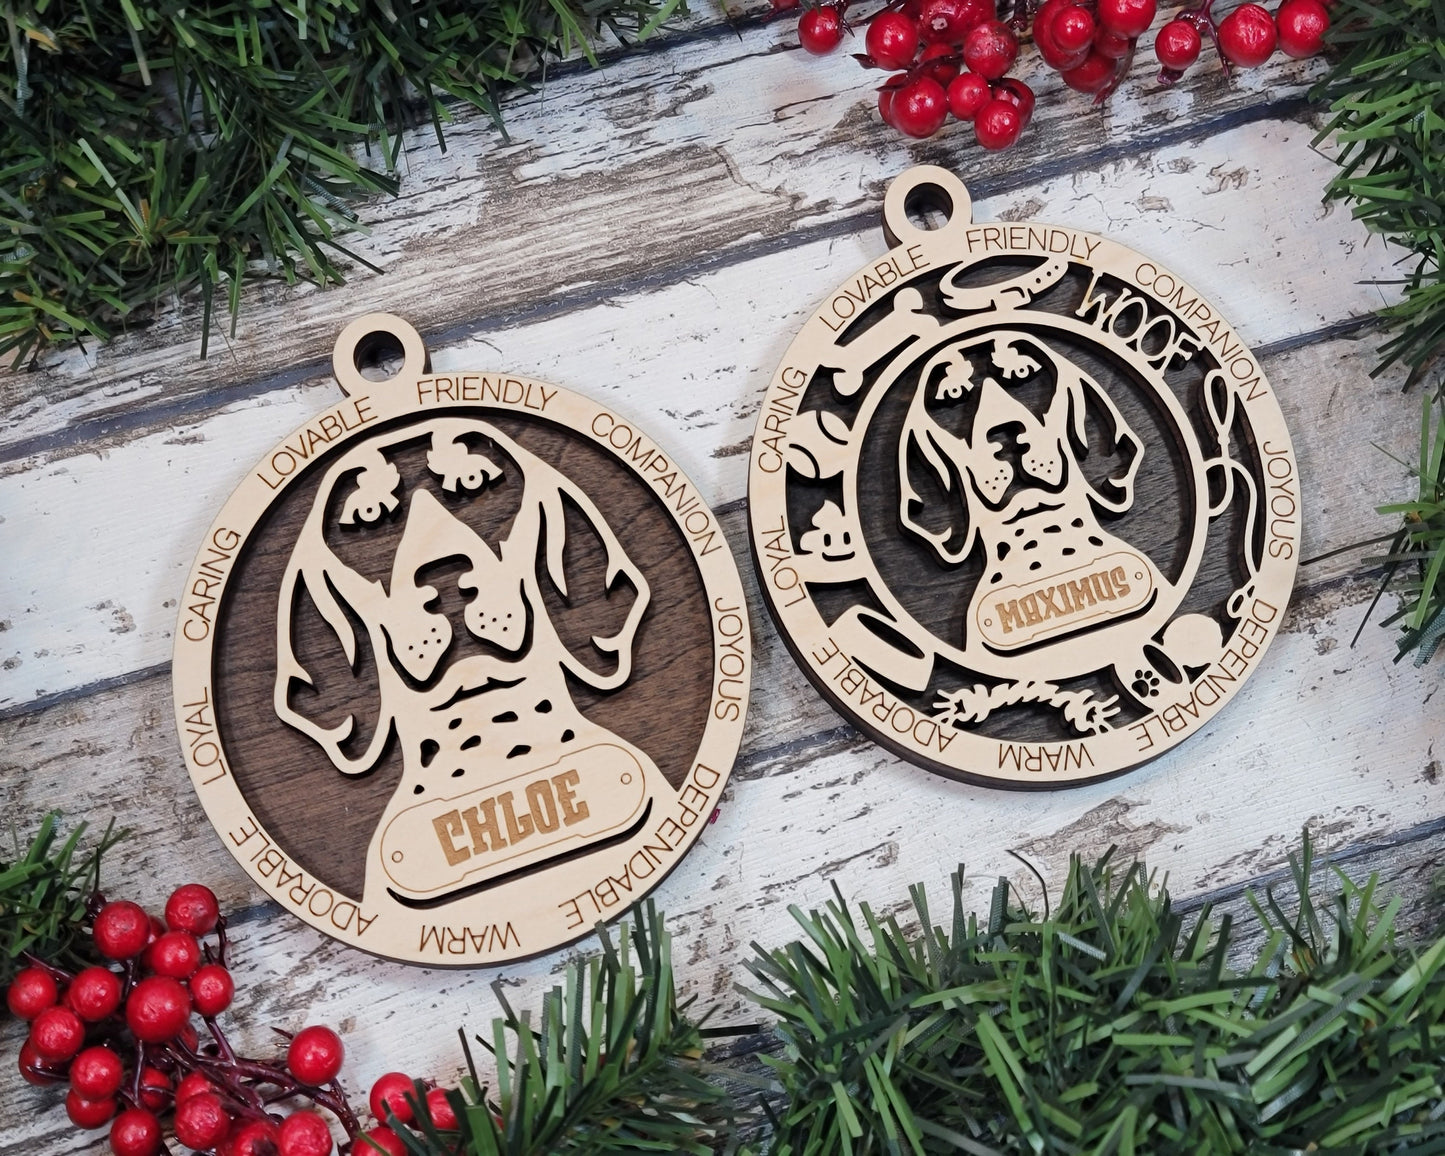 Bluetick Coonhound - Adorable Dog Ornaments - 2 Ornaments included - SVG, PDF, AI File Download - Sized for Glowforge